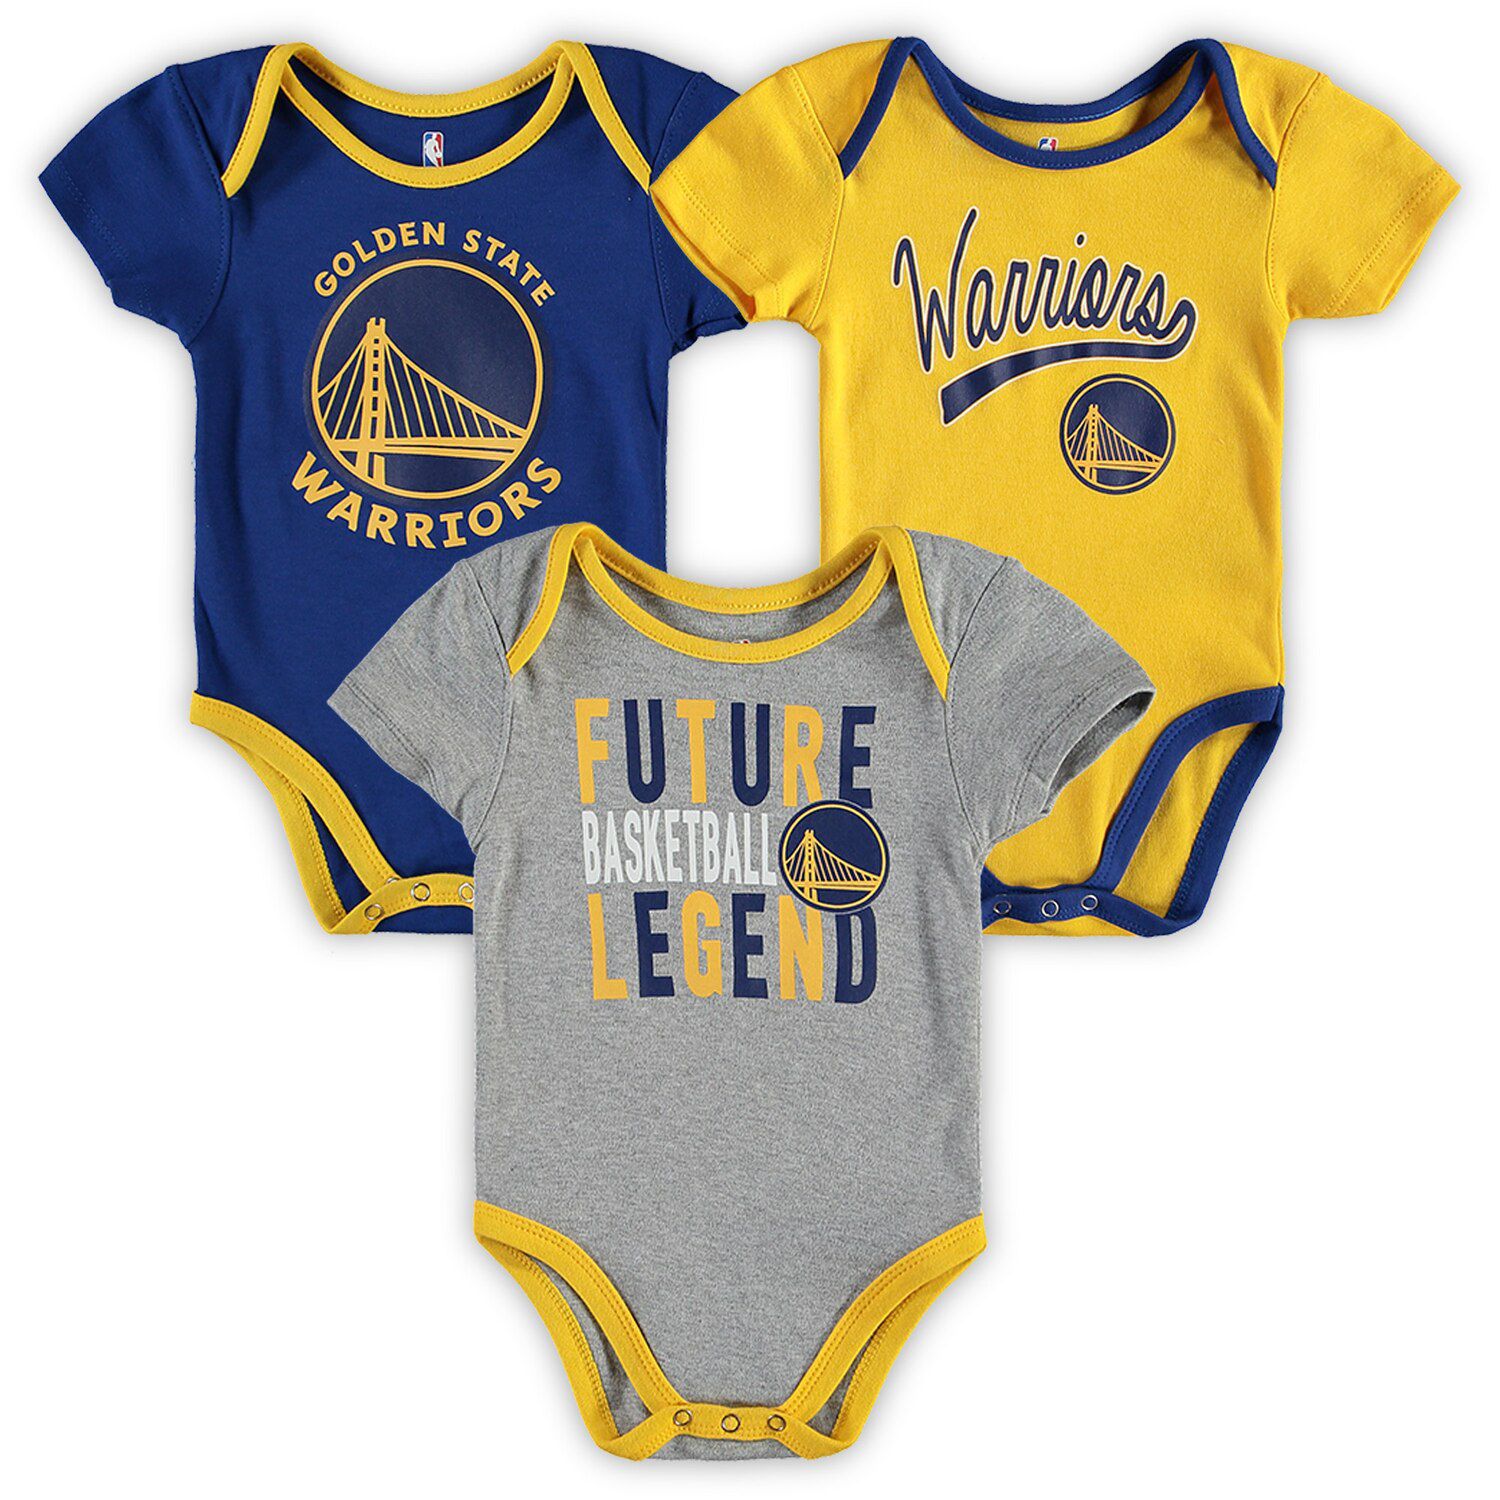 champion outfit for babies